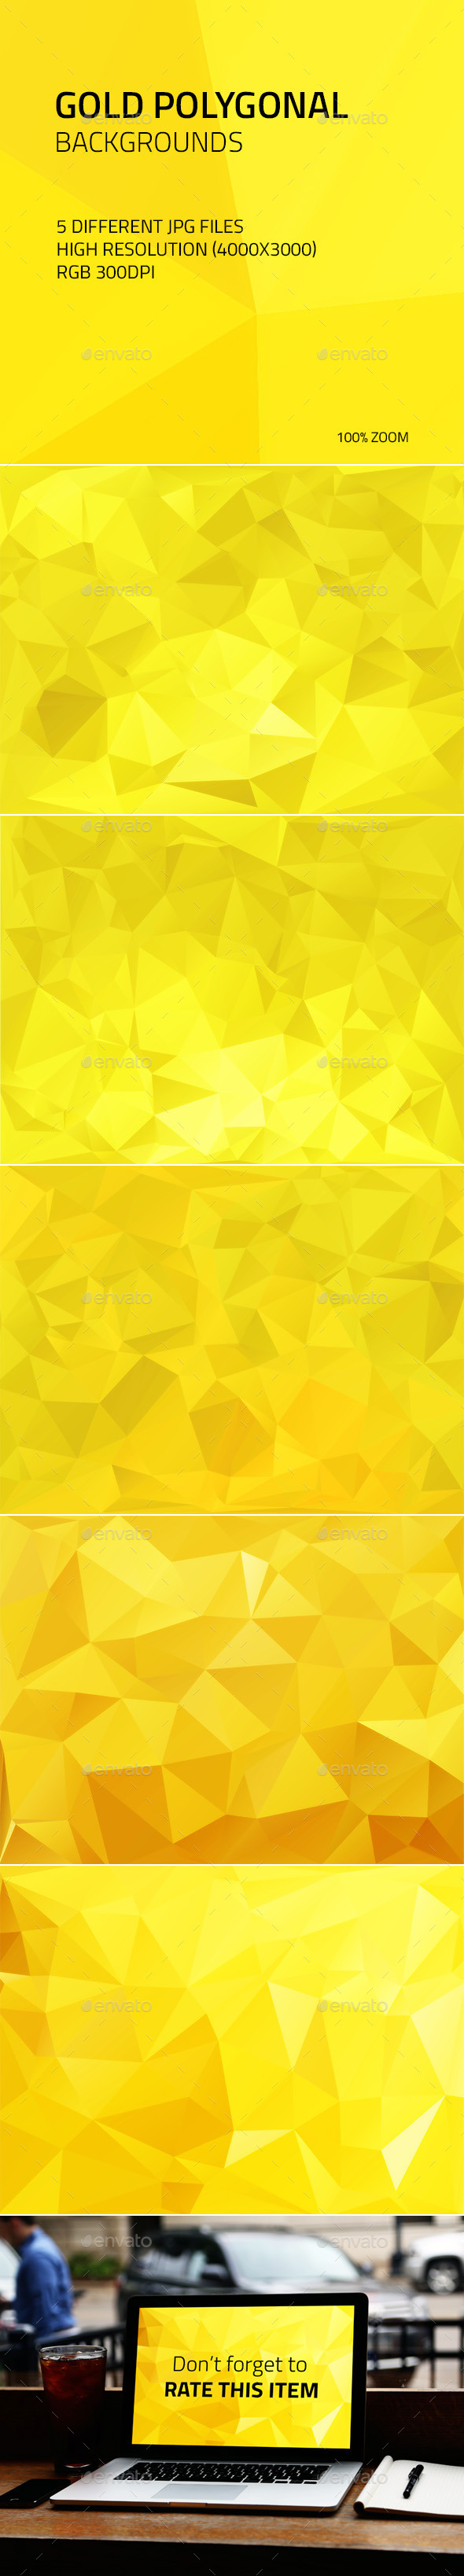 Gold Polygonal Backgrounds